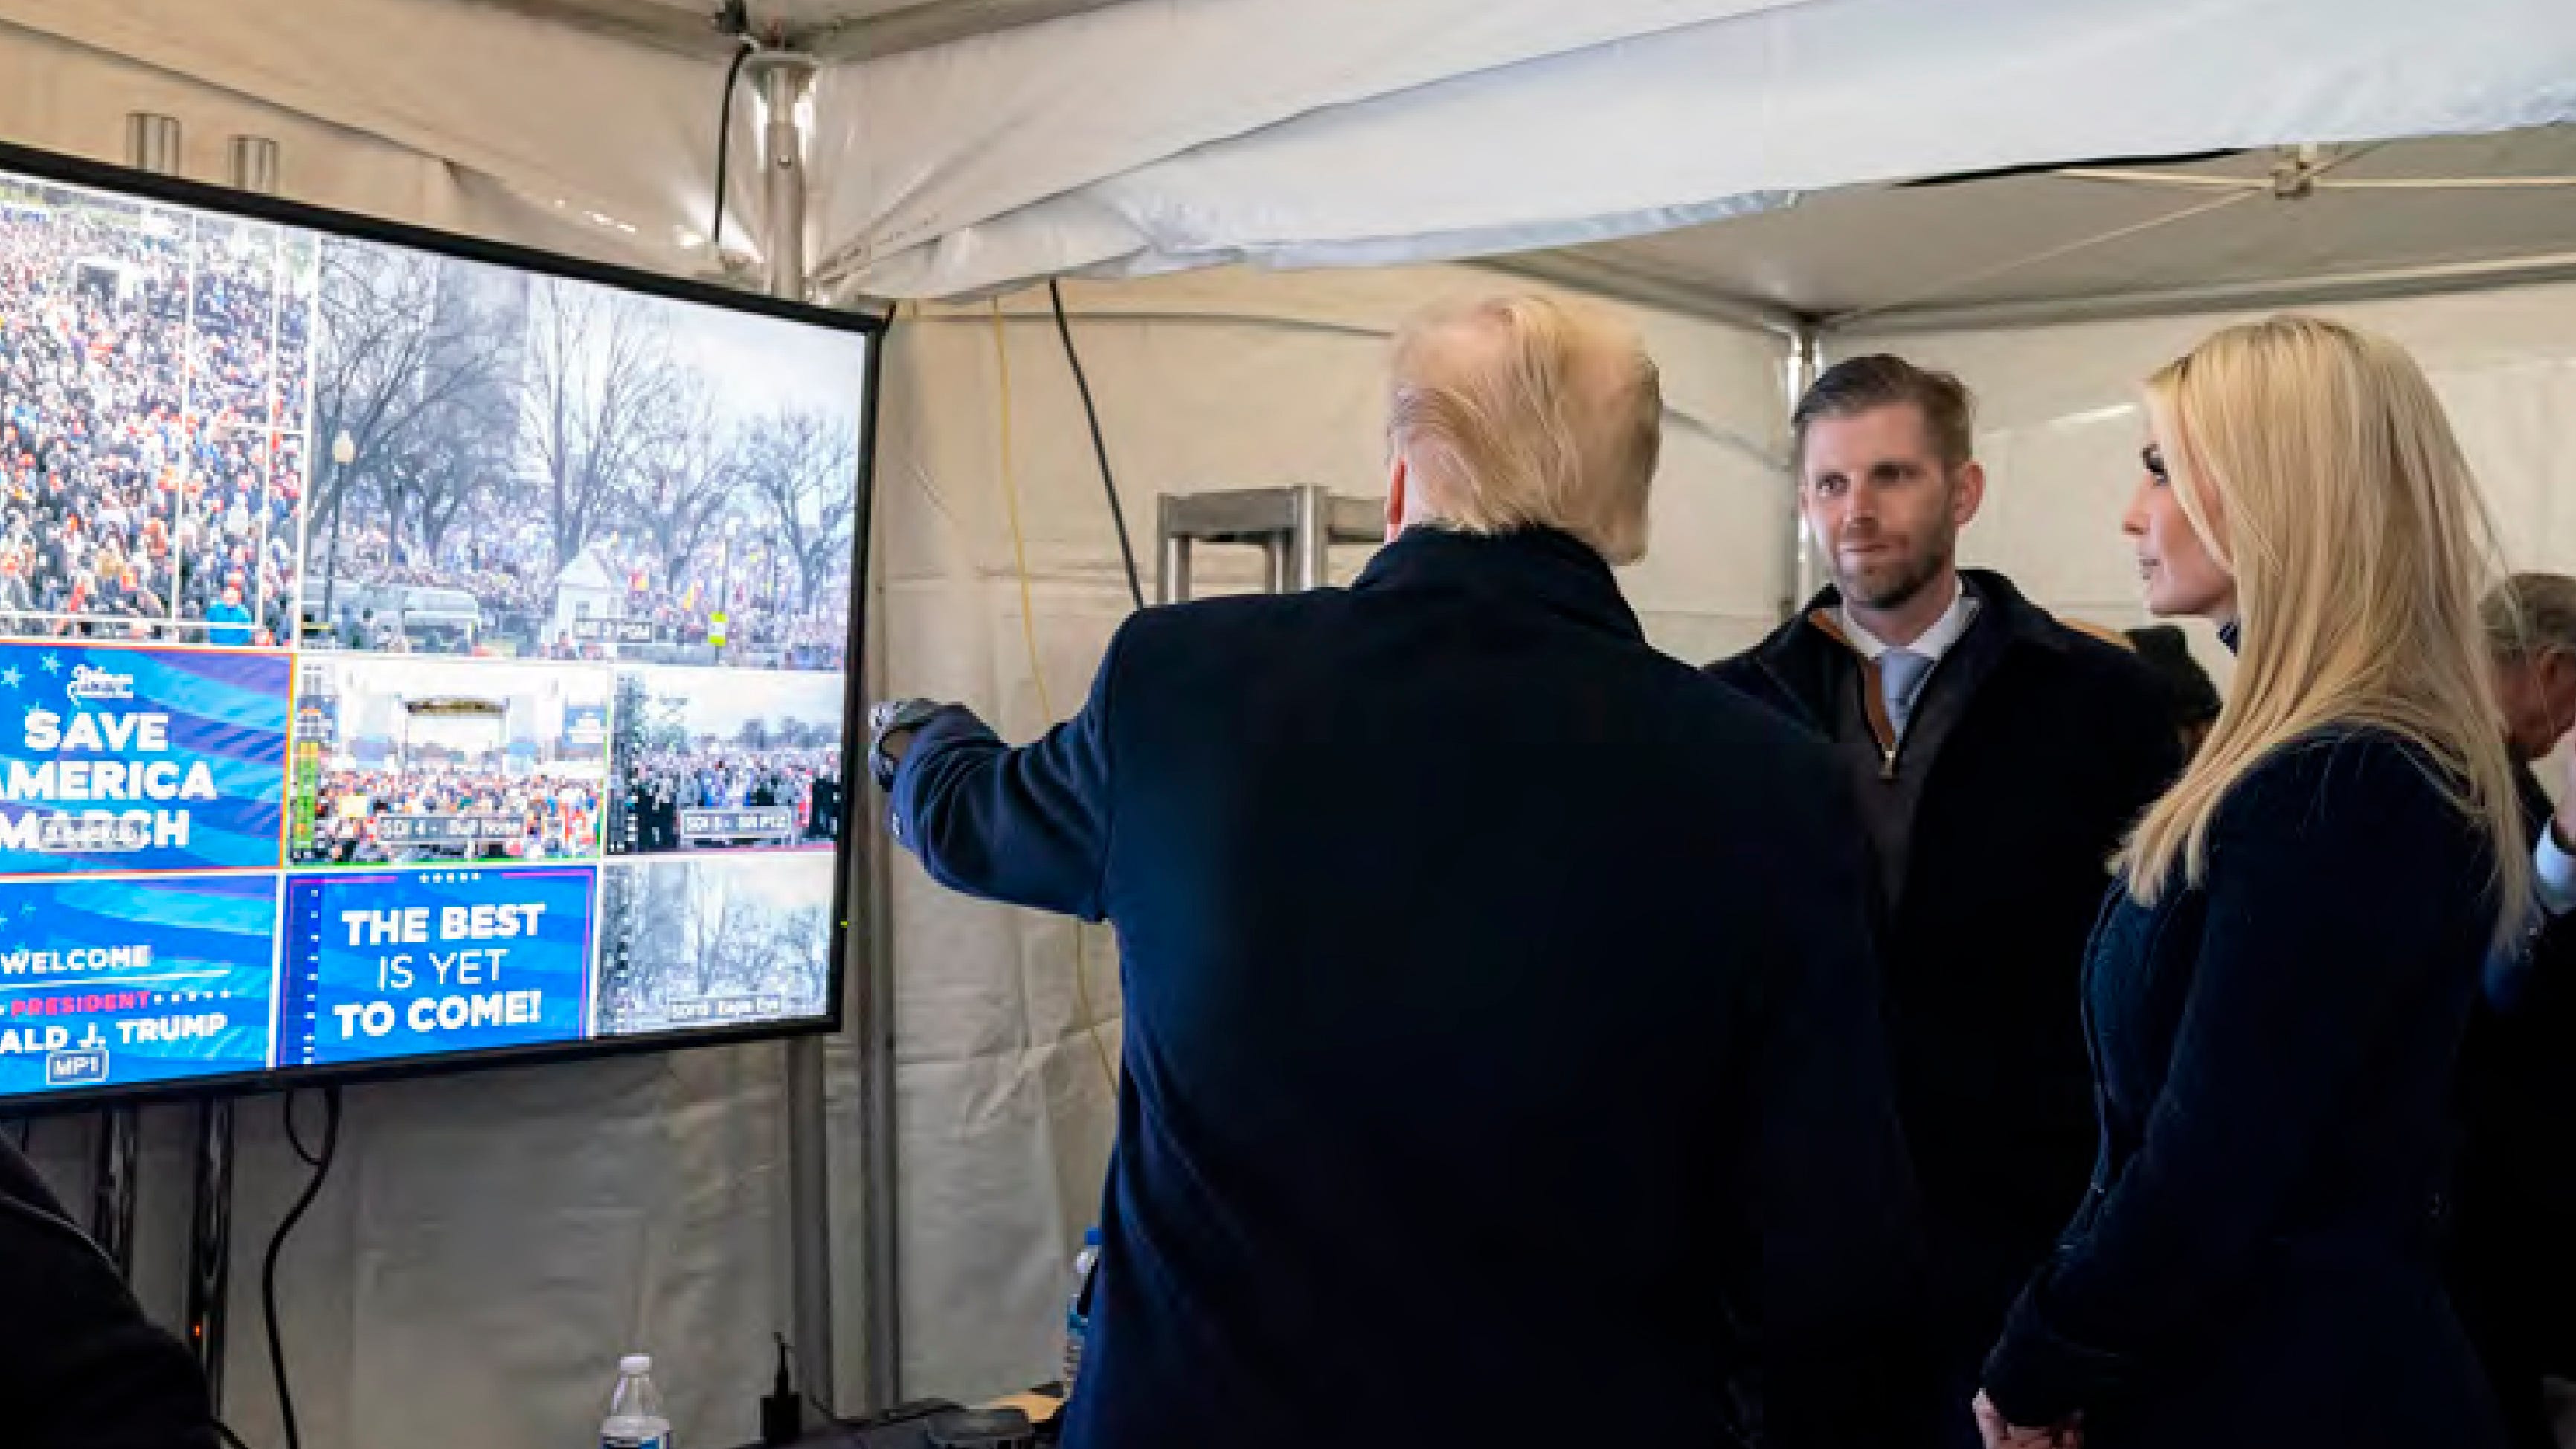 In this image released in the final report by the House select committee investigating the Jan. 6 attack on the U.S. Capitol, on Thursday, Dec. 22, 2022, President Donald Trump looks at video monitors showing the crowd gathered on the Ellipse on the morning of Jan. 6, 2021, before he spoke. At rights is Ivanka Trump and second from right is Eric Trump.